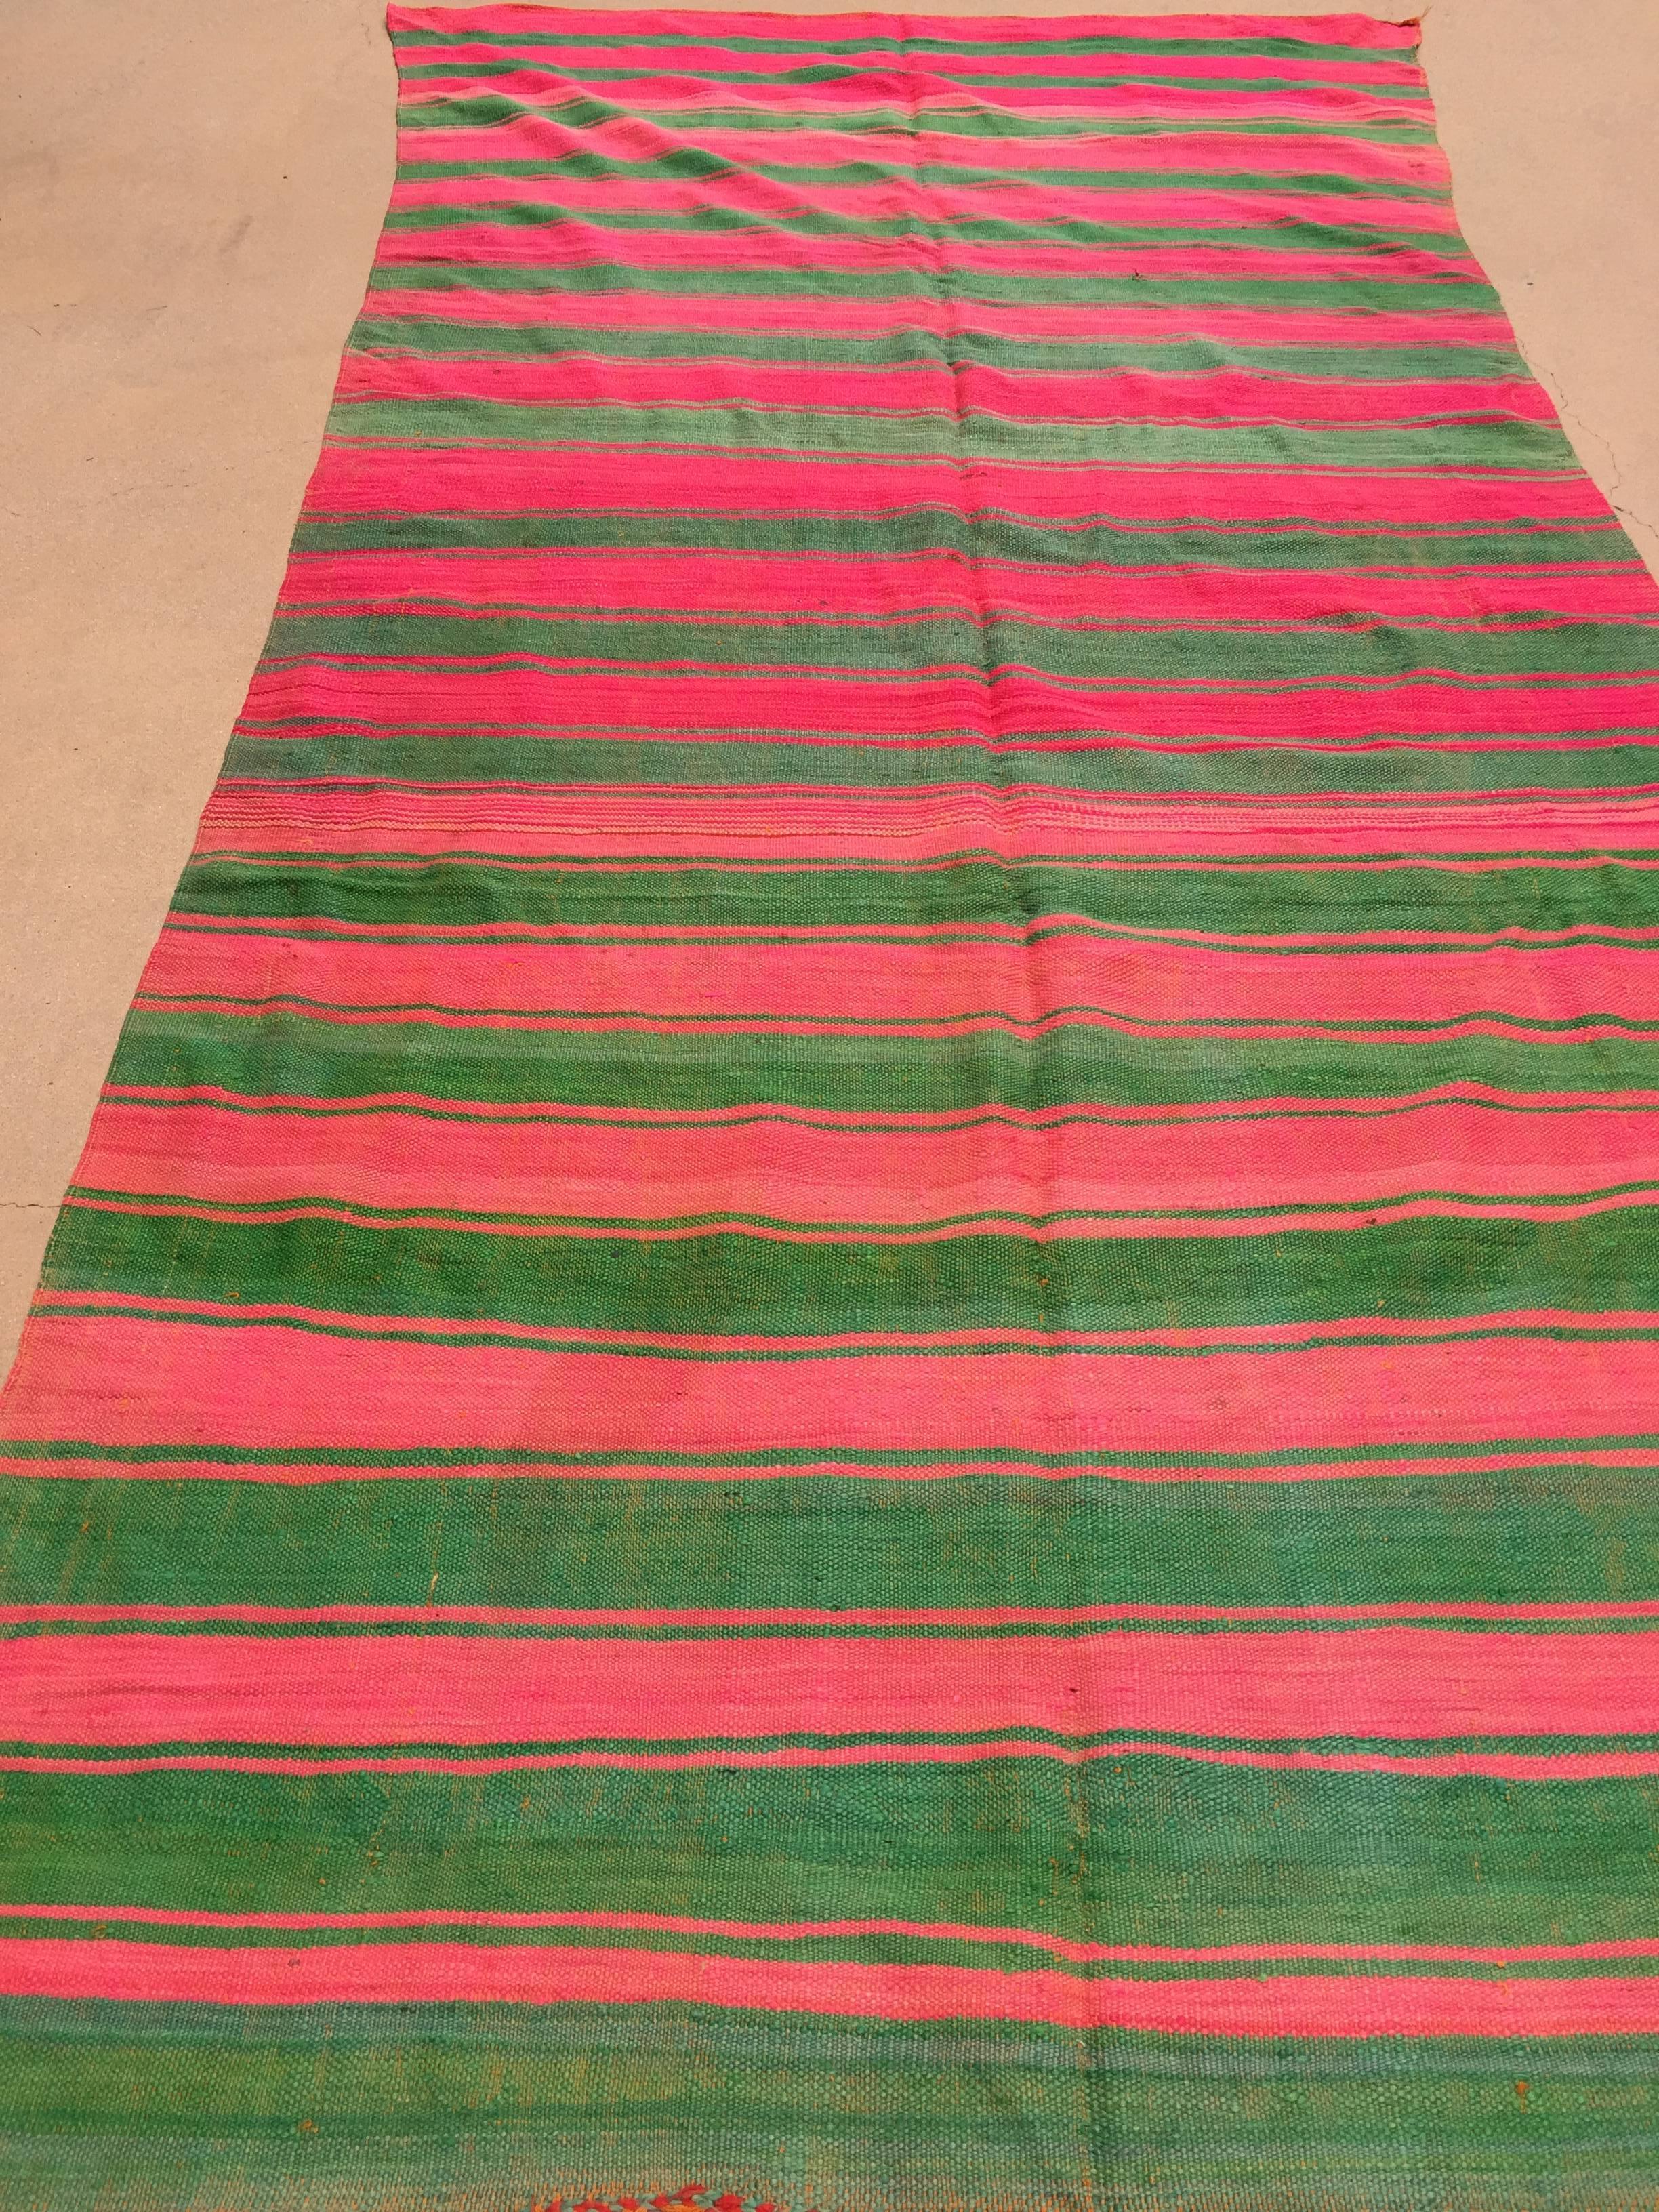 Tribal Moroccan Vintage Flat-Weave Rug Pink and Green